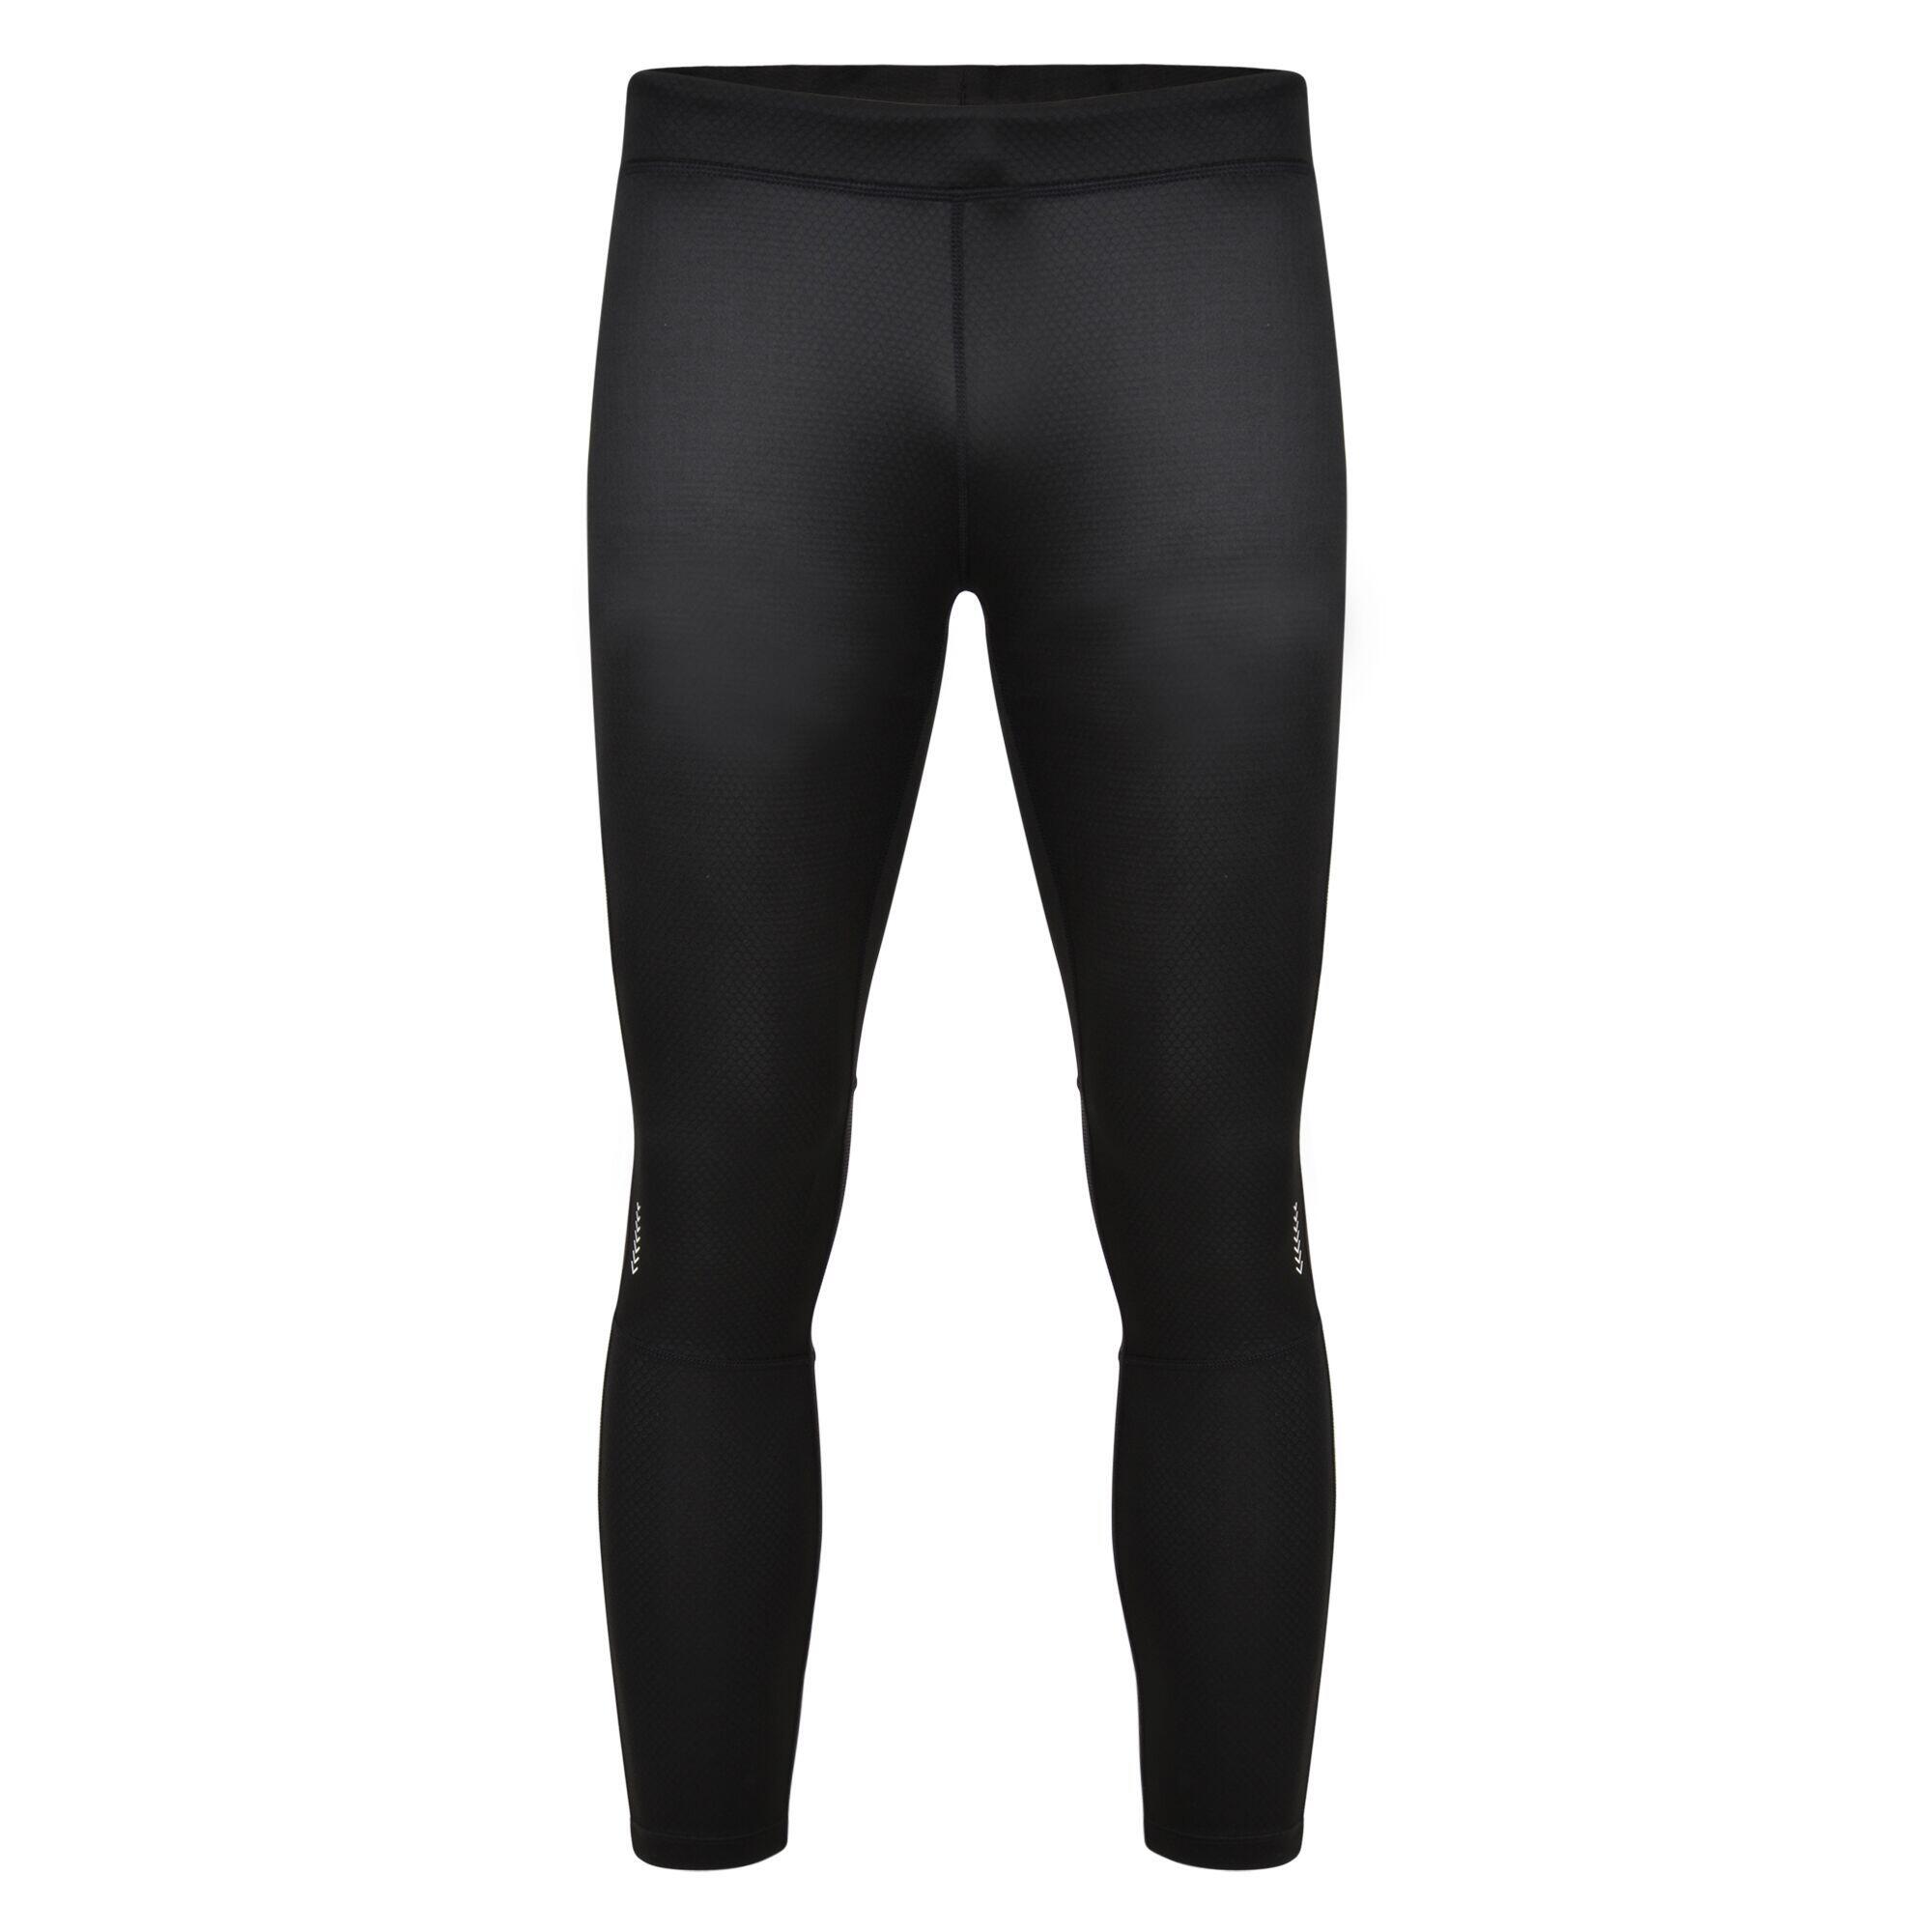 Mens Abaccus II Fitness Tights (Black) 1/4